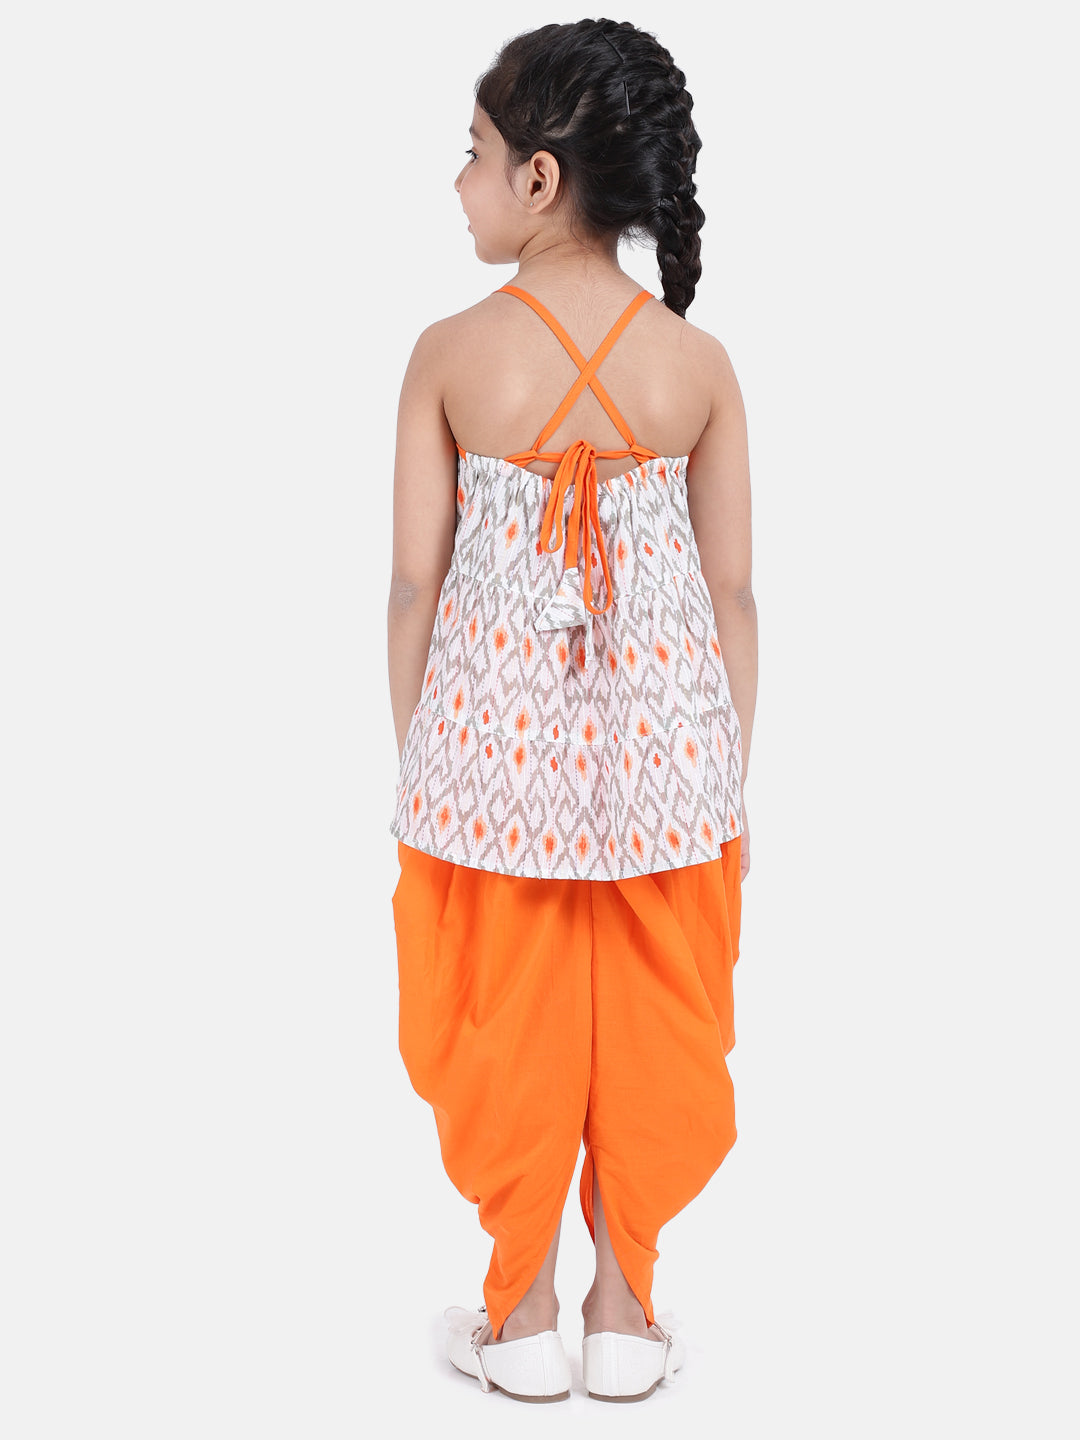 BownBee Cambric Cotton Halter Neck Top Dhoti For Girls-Super Sale